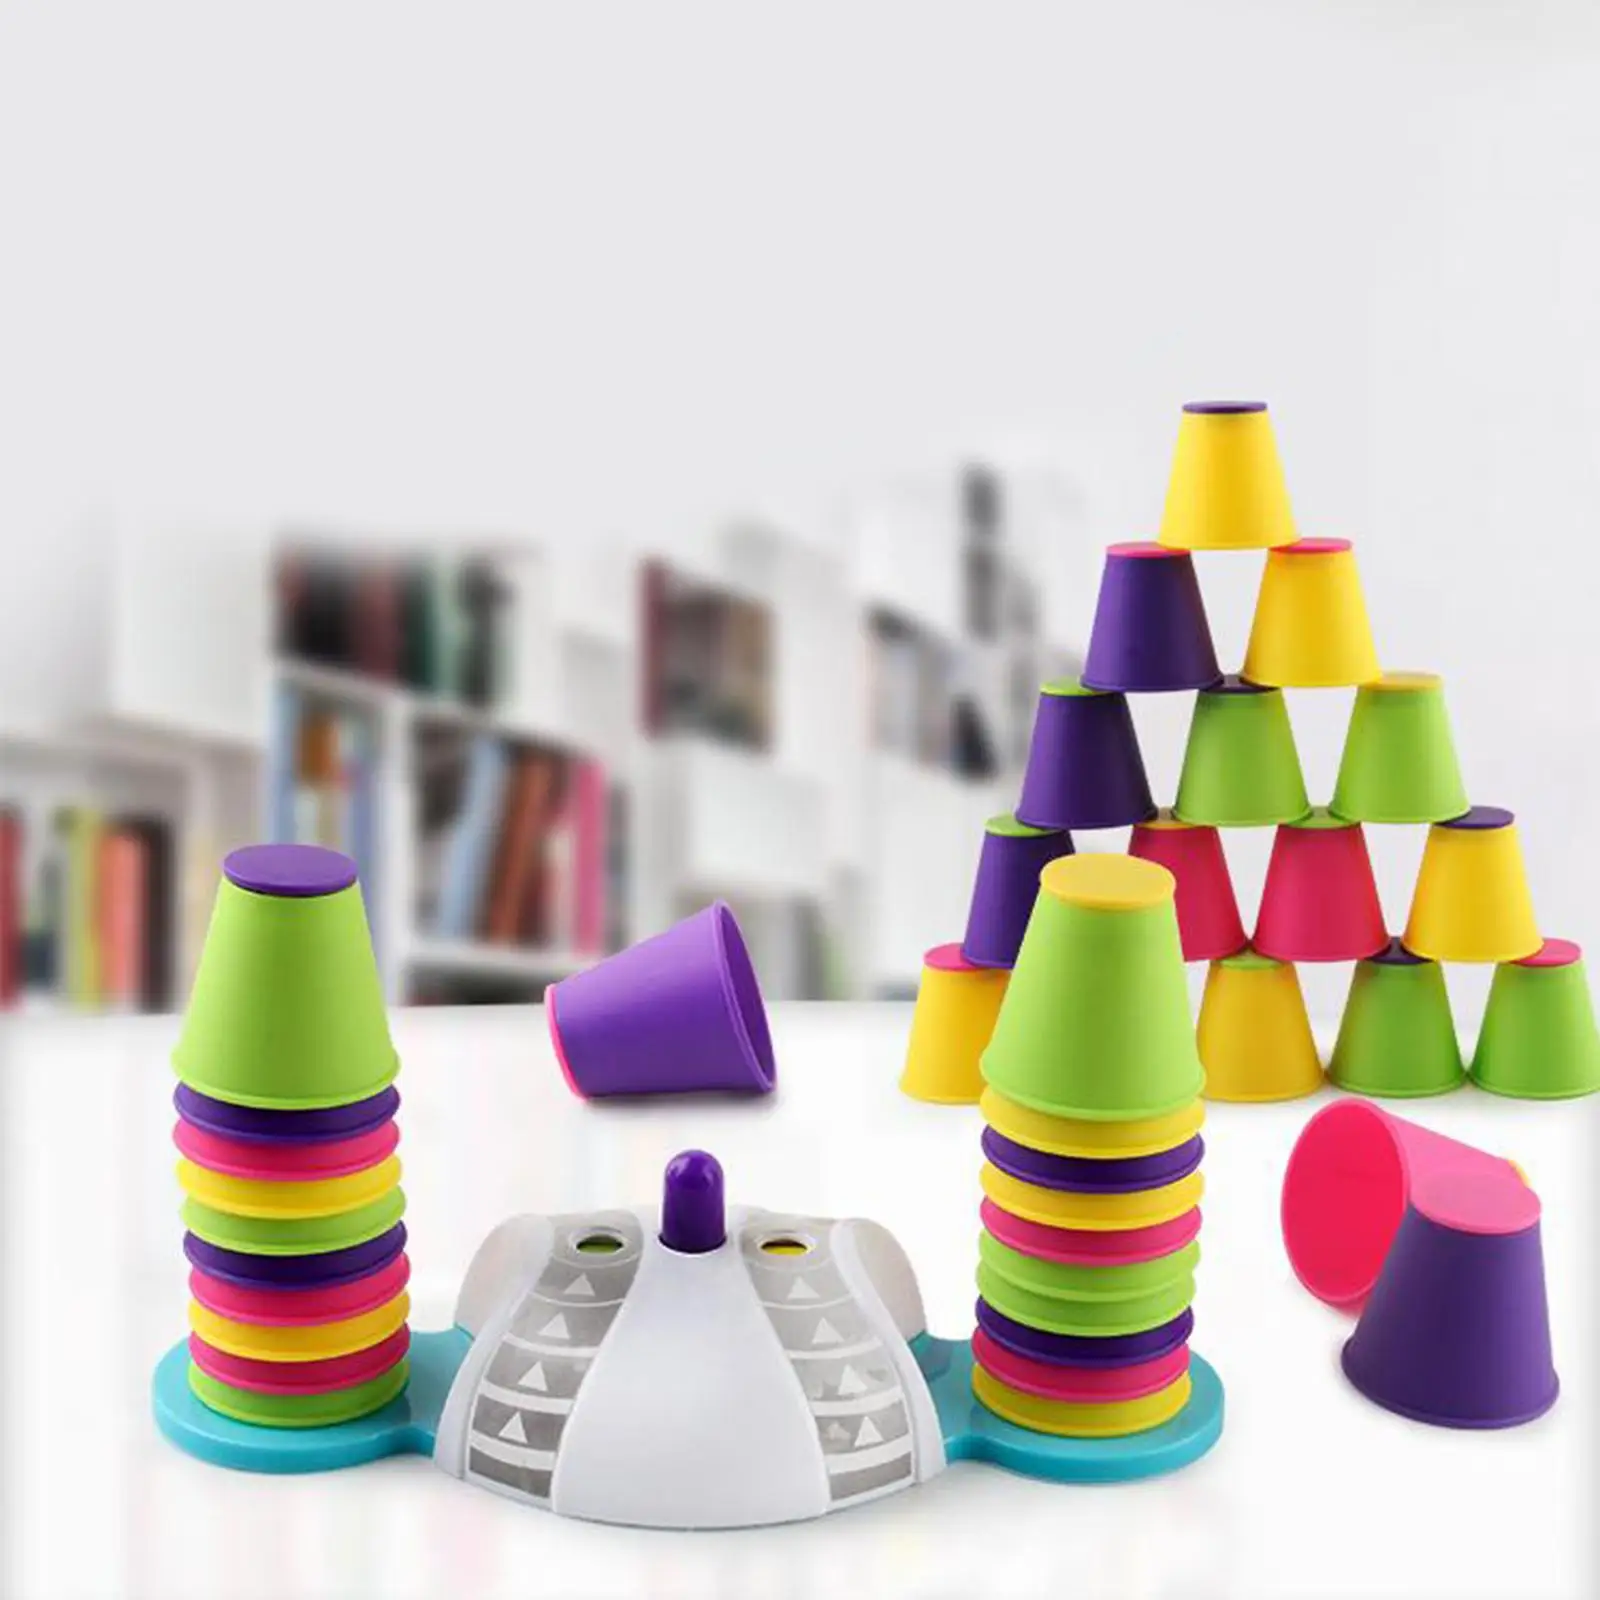 Colorful Stacking & Nesting Cups - 32 Cups Fun Color Learning Toy - Great Toy